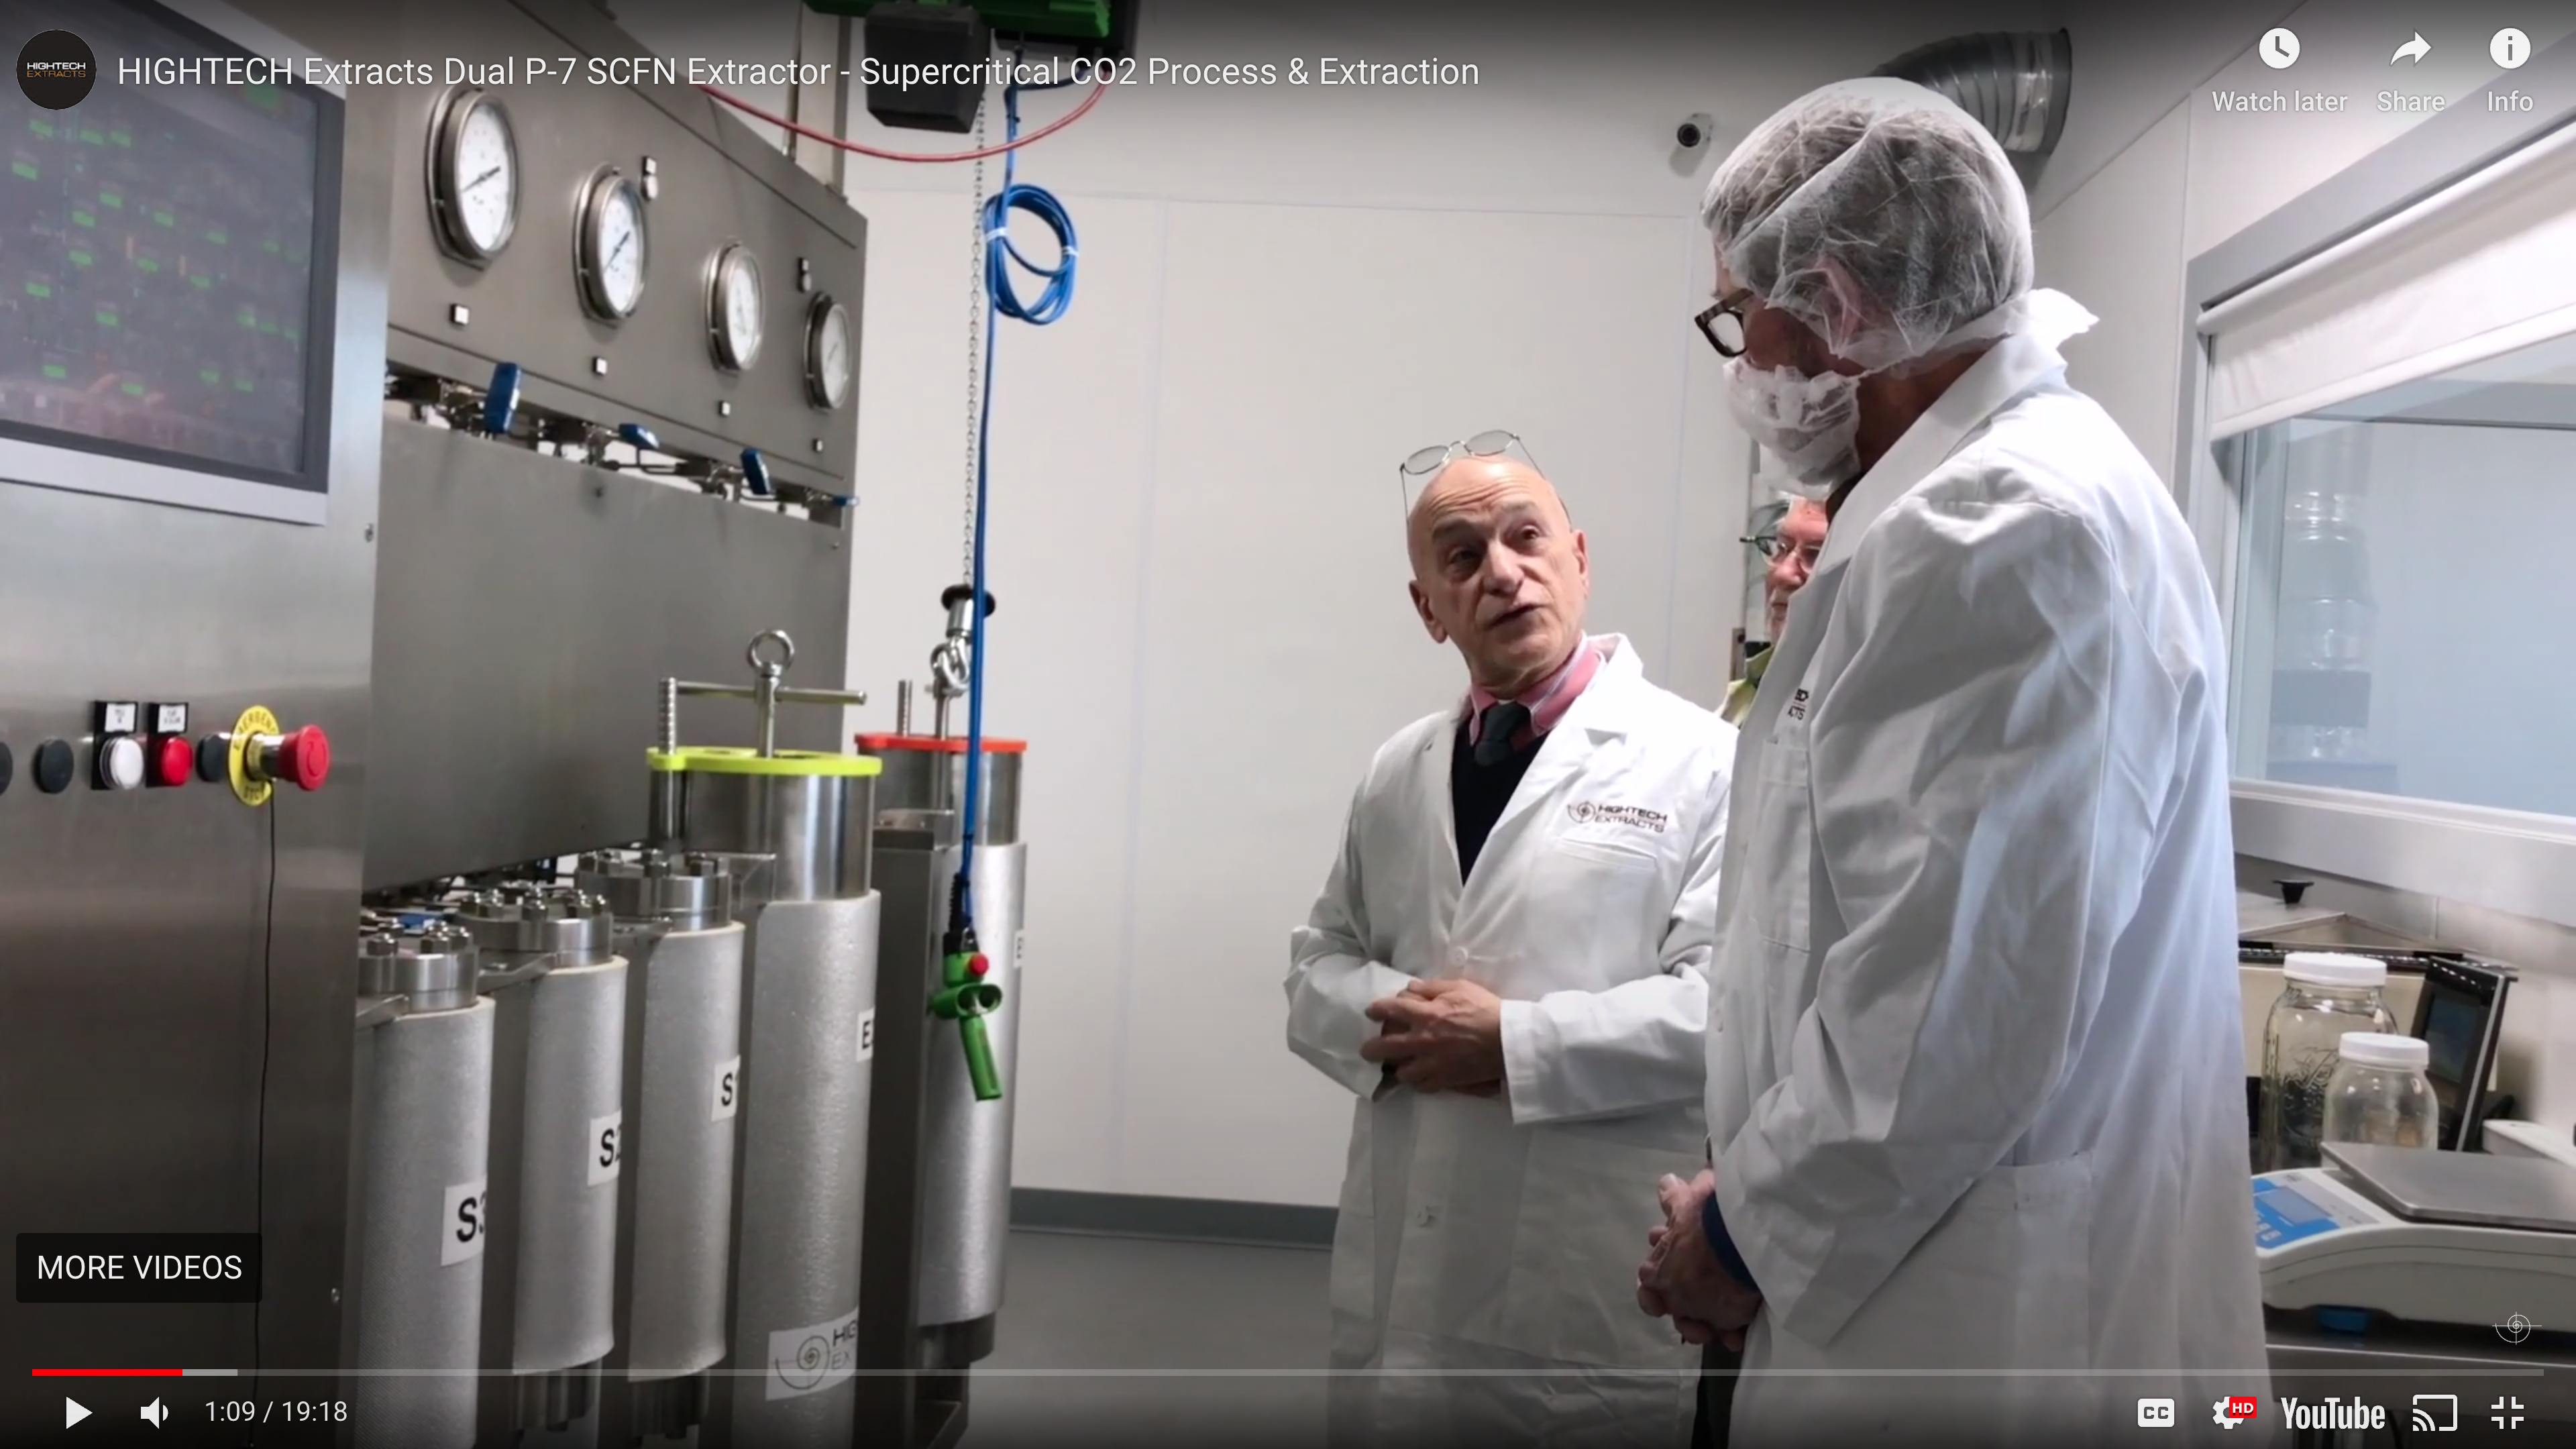 VIDEO: Dual P-7 SCFN Extractor – Supercritical CO2 Process & Extraction